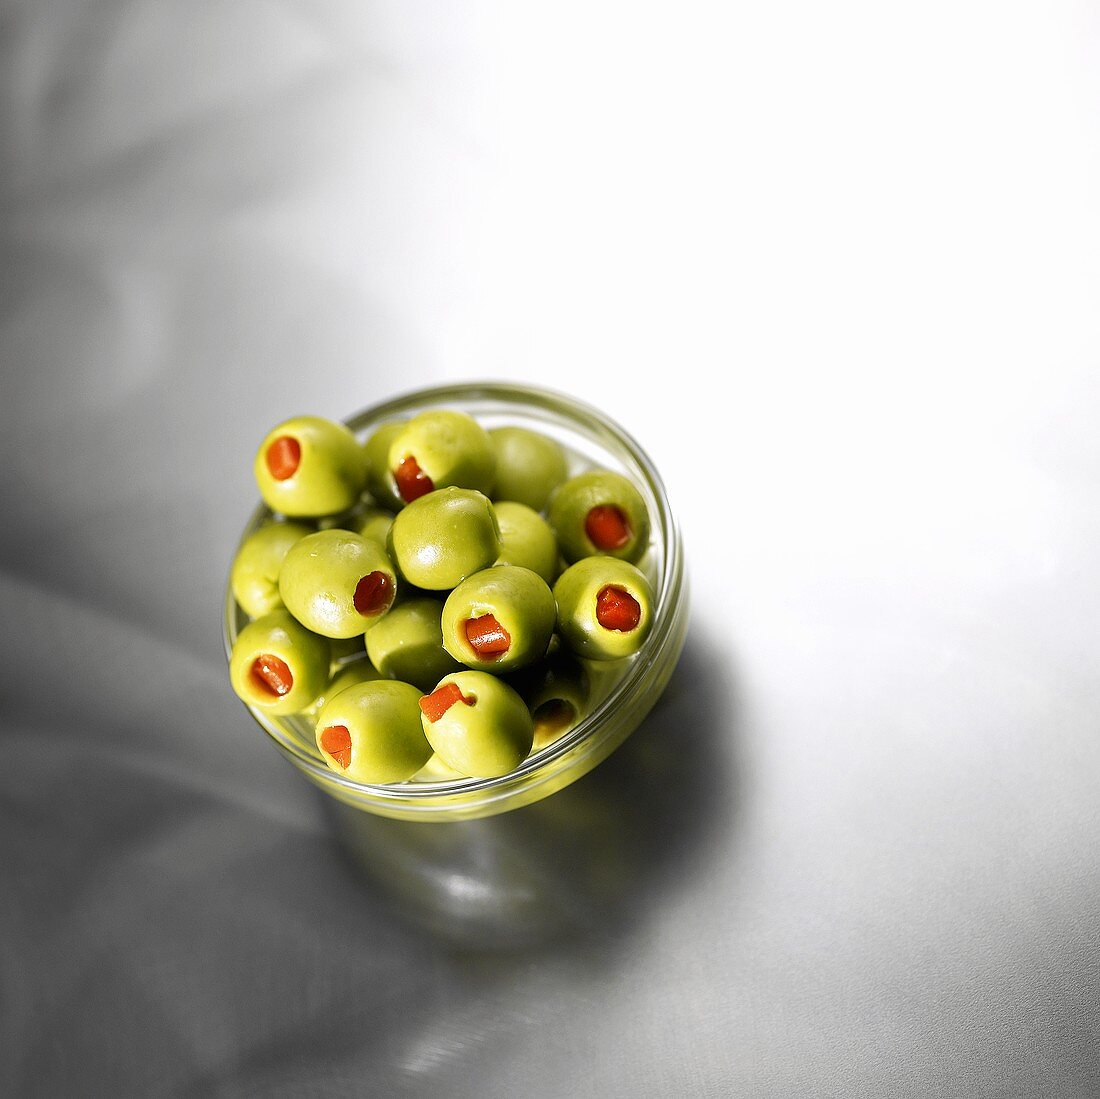 Stuffed green olives in glass dish